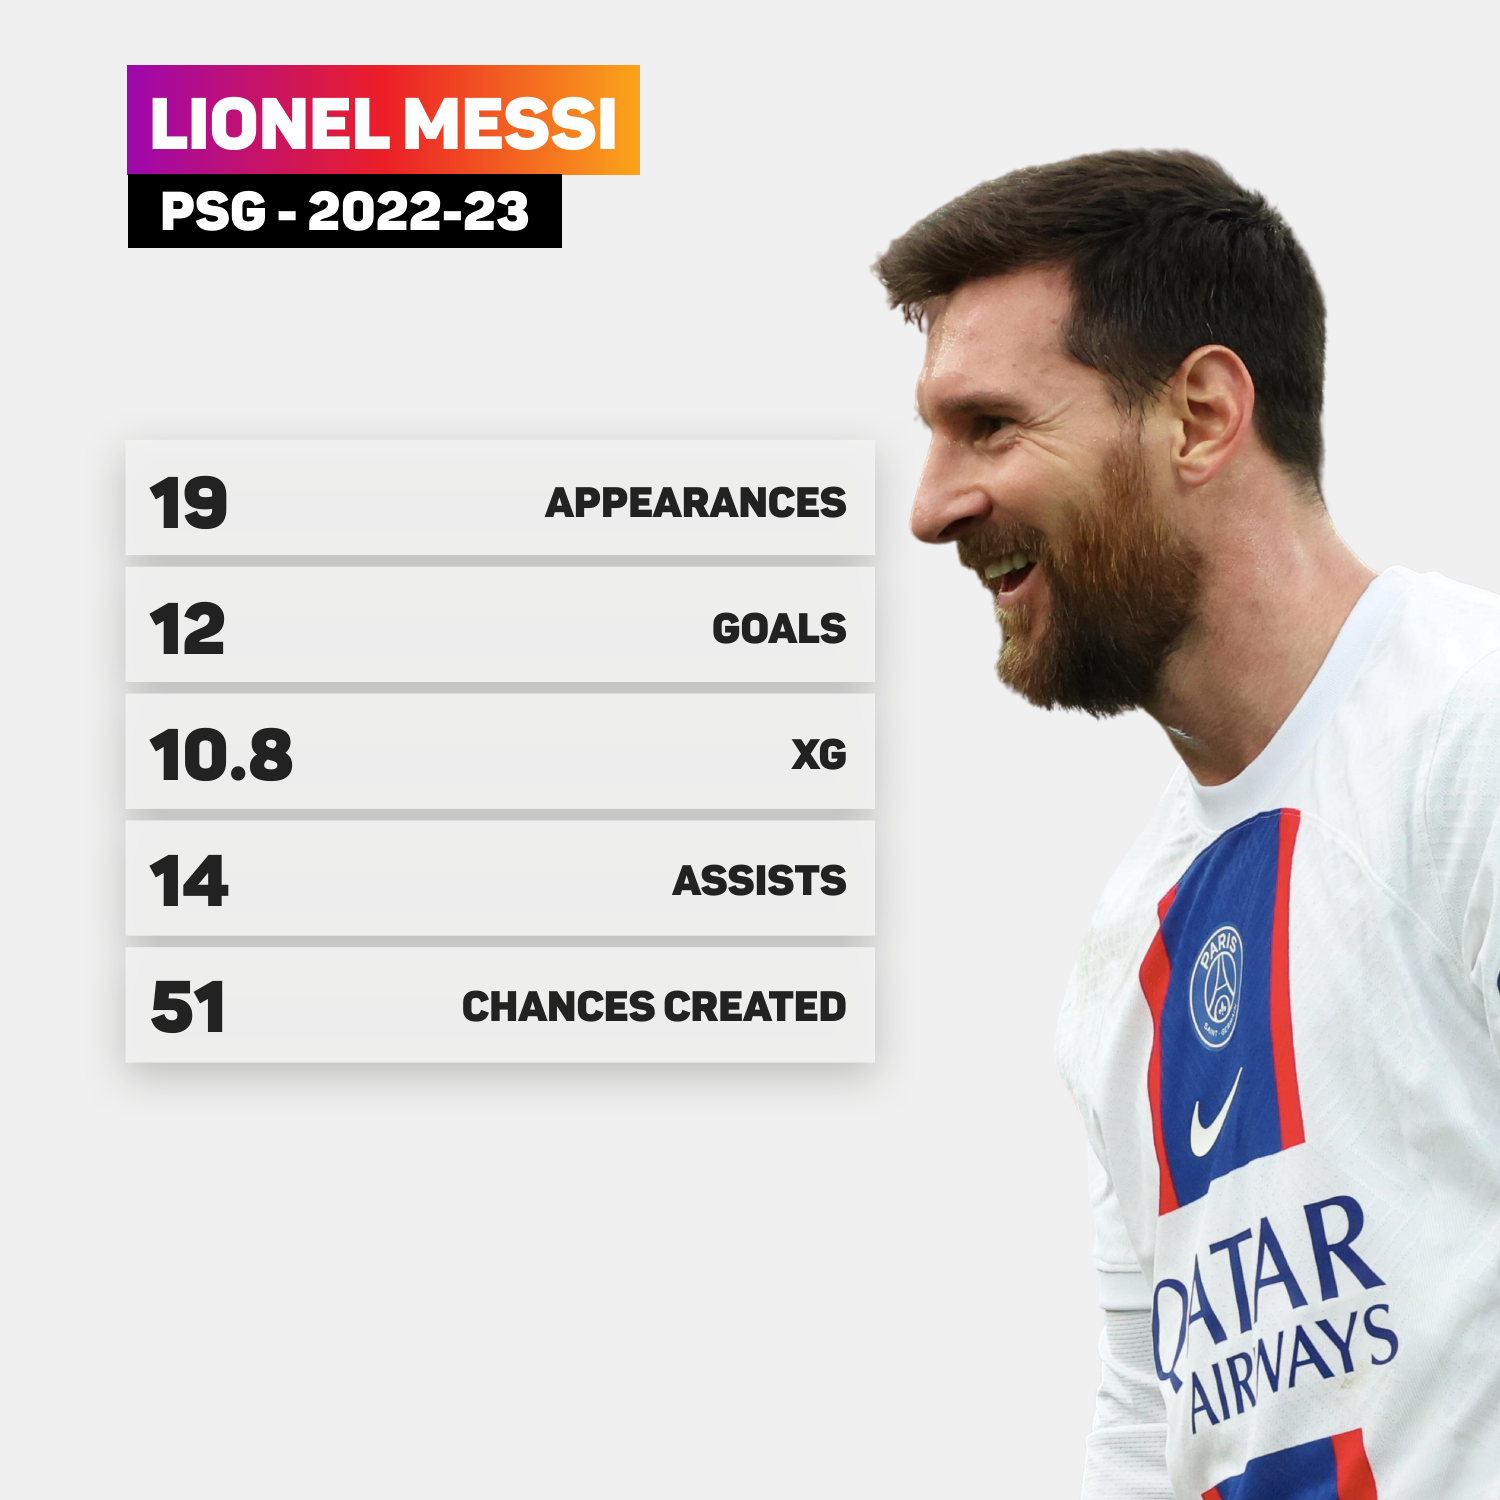 Lionel Messi has contributed to 26 goals for his club this season